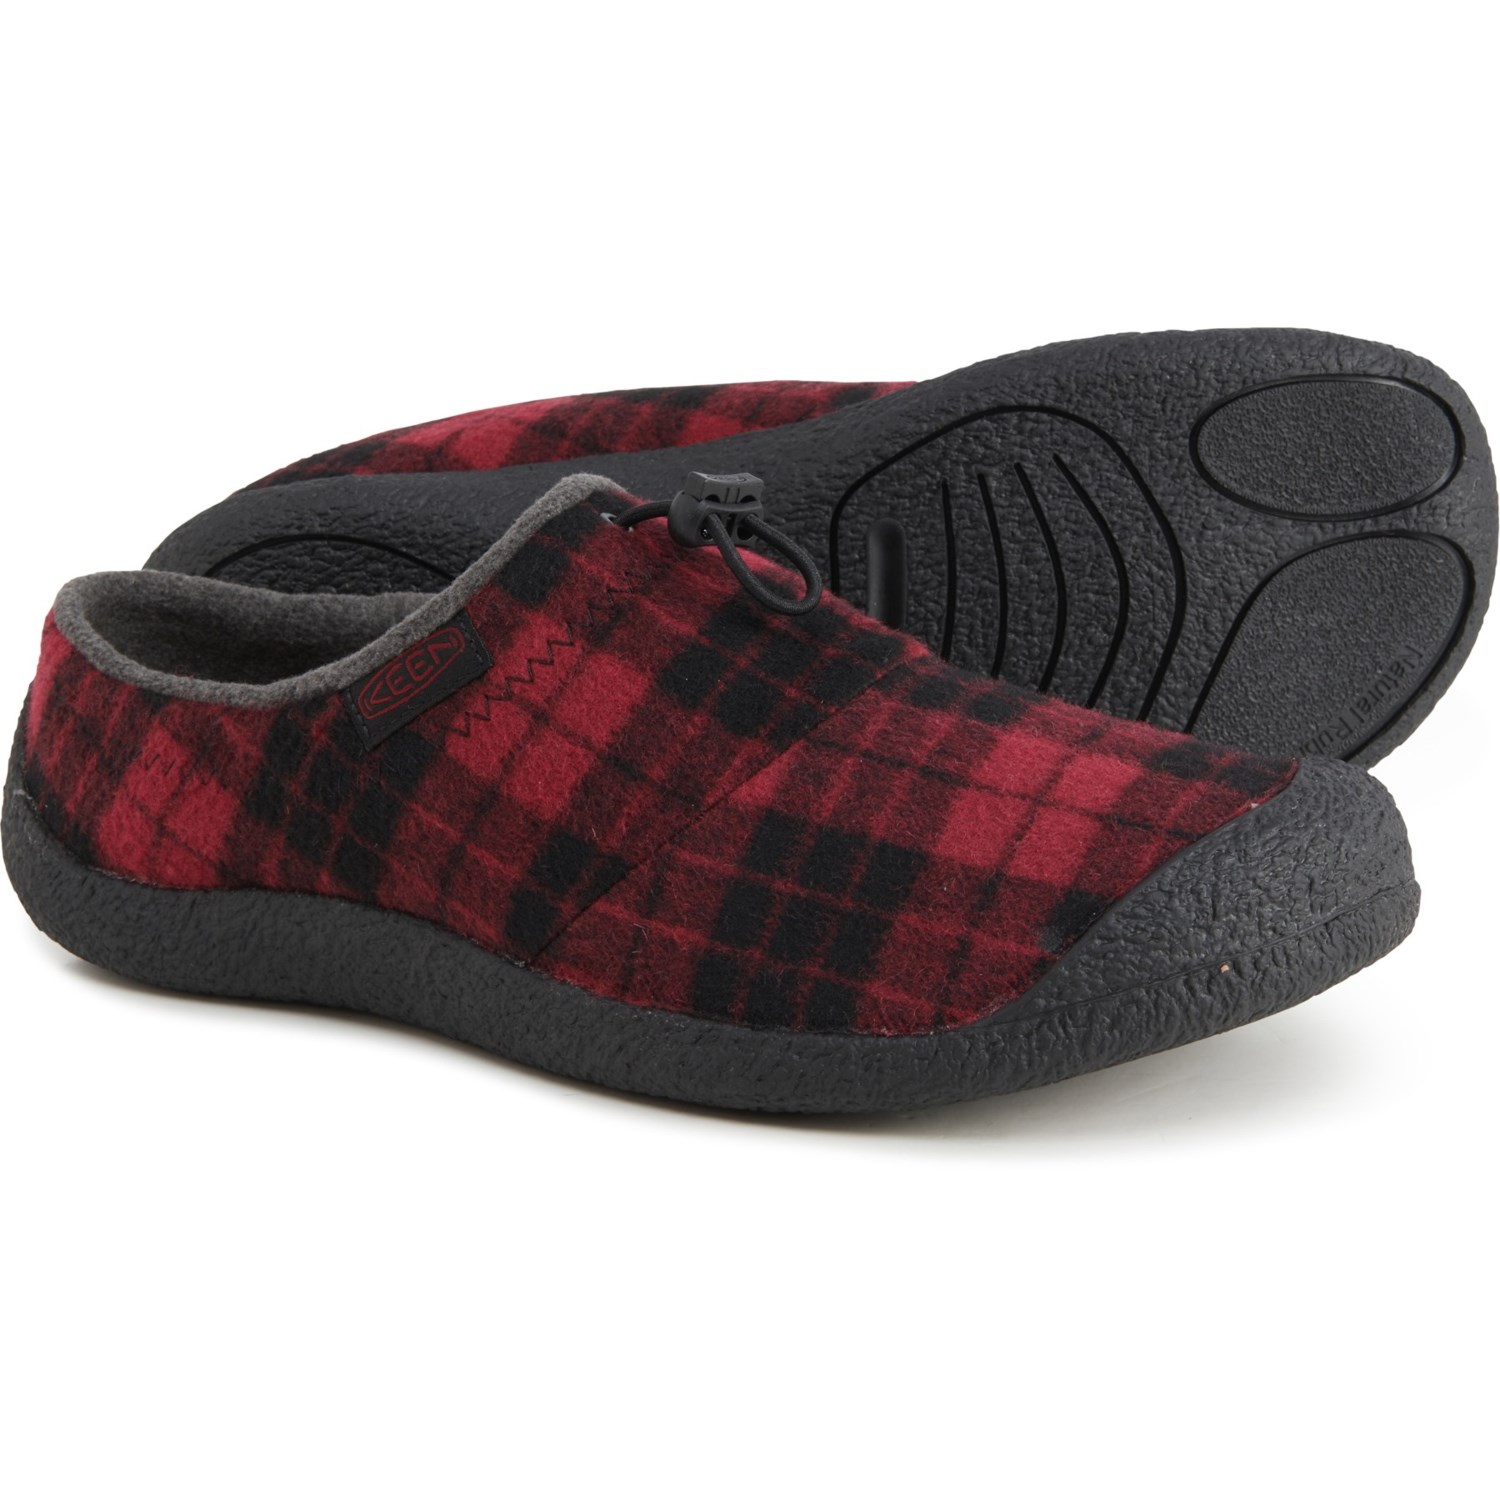 Keen Howser III Plaid Shoes (For Men) - Save 44%